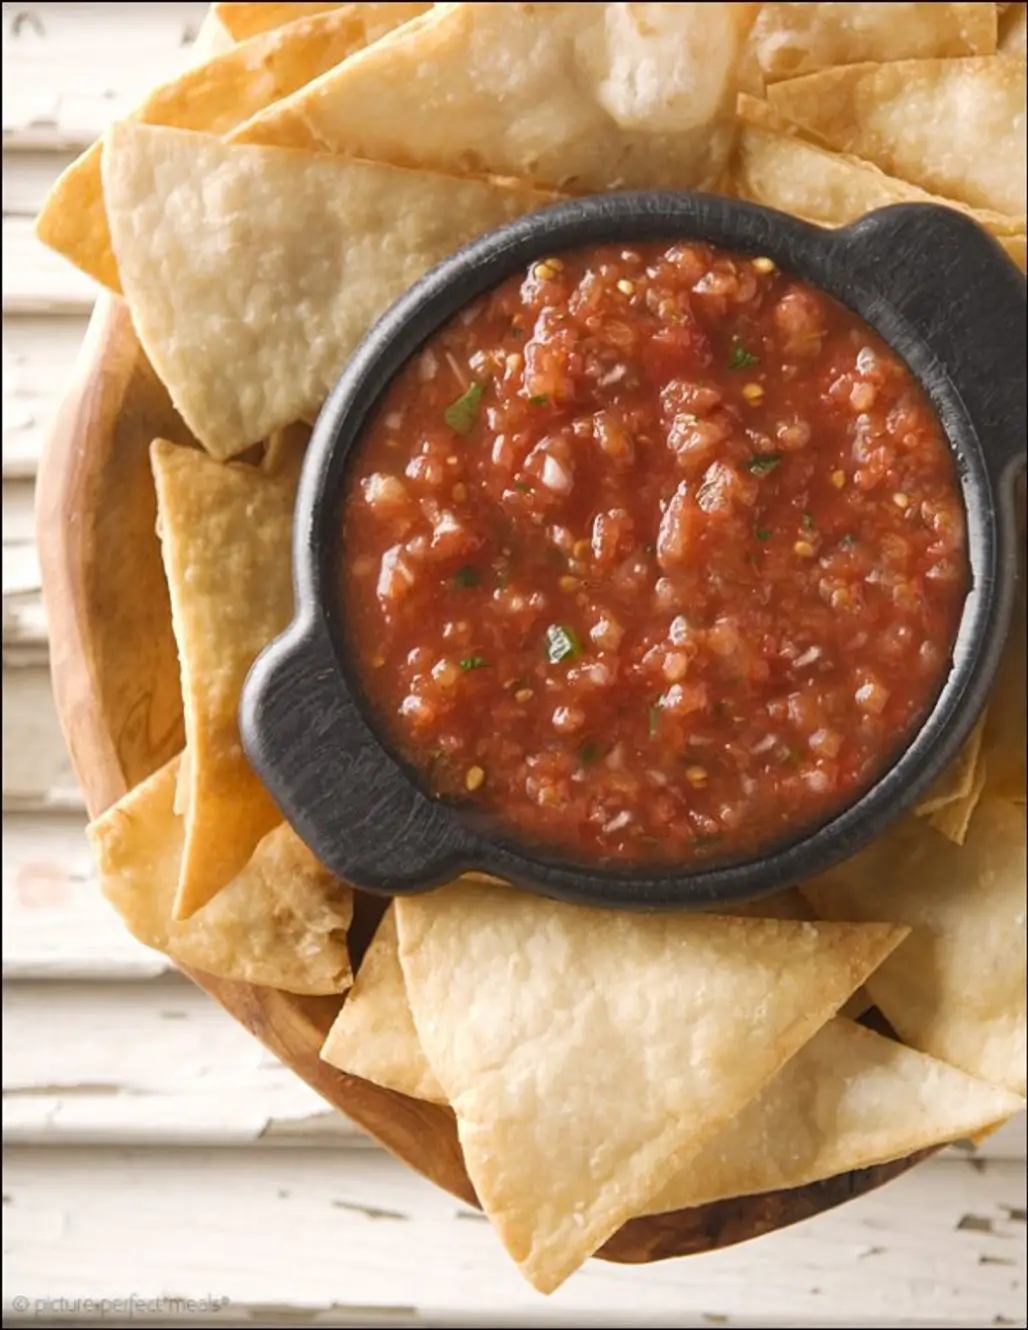 Chips and Salsa